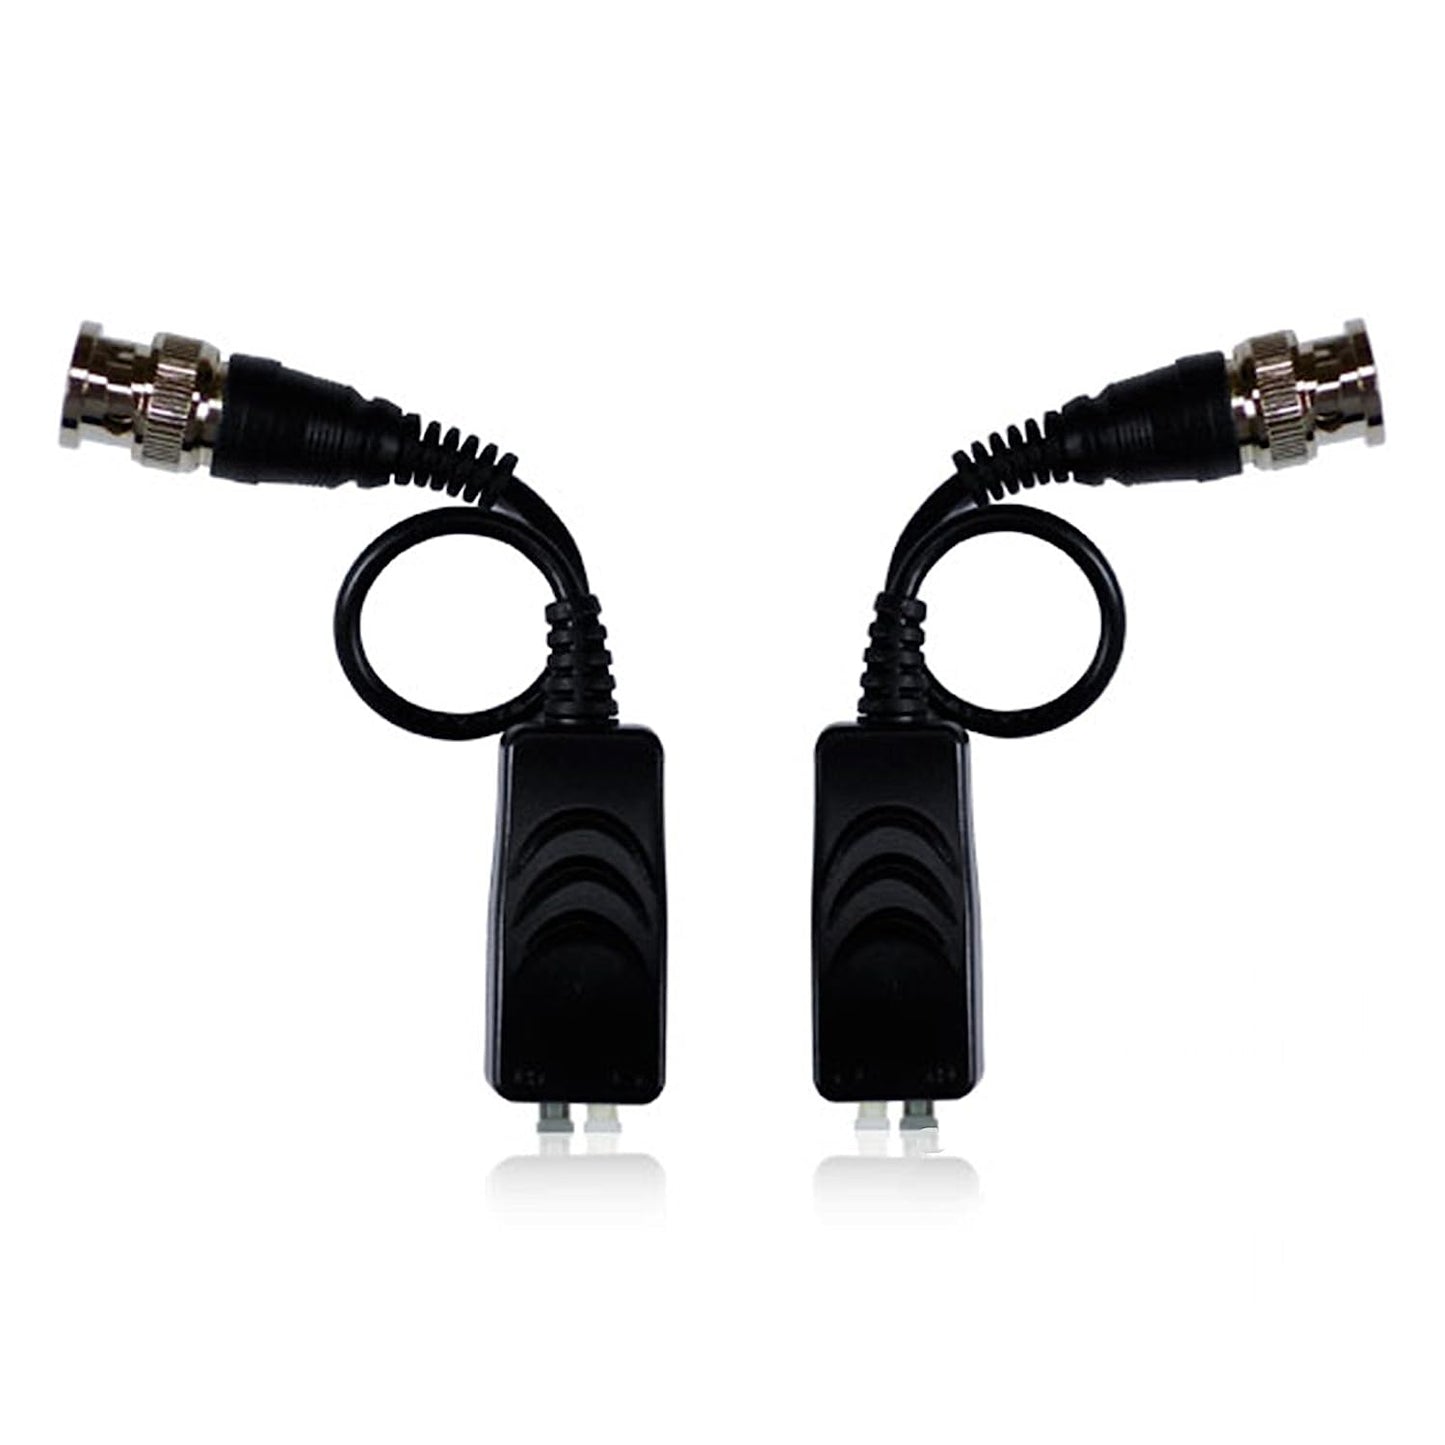 Life Set 2 passive video baluns, cable for video signal transmission, transmitter receiver